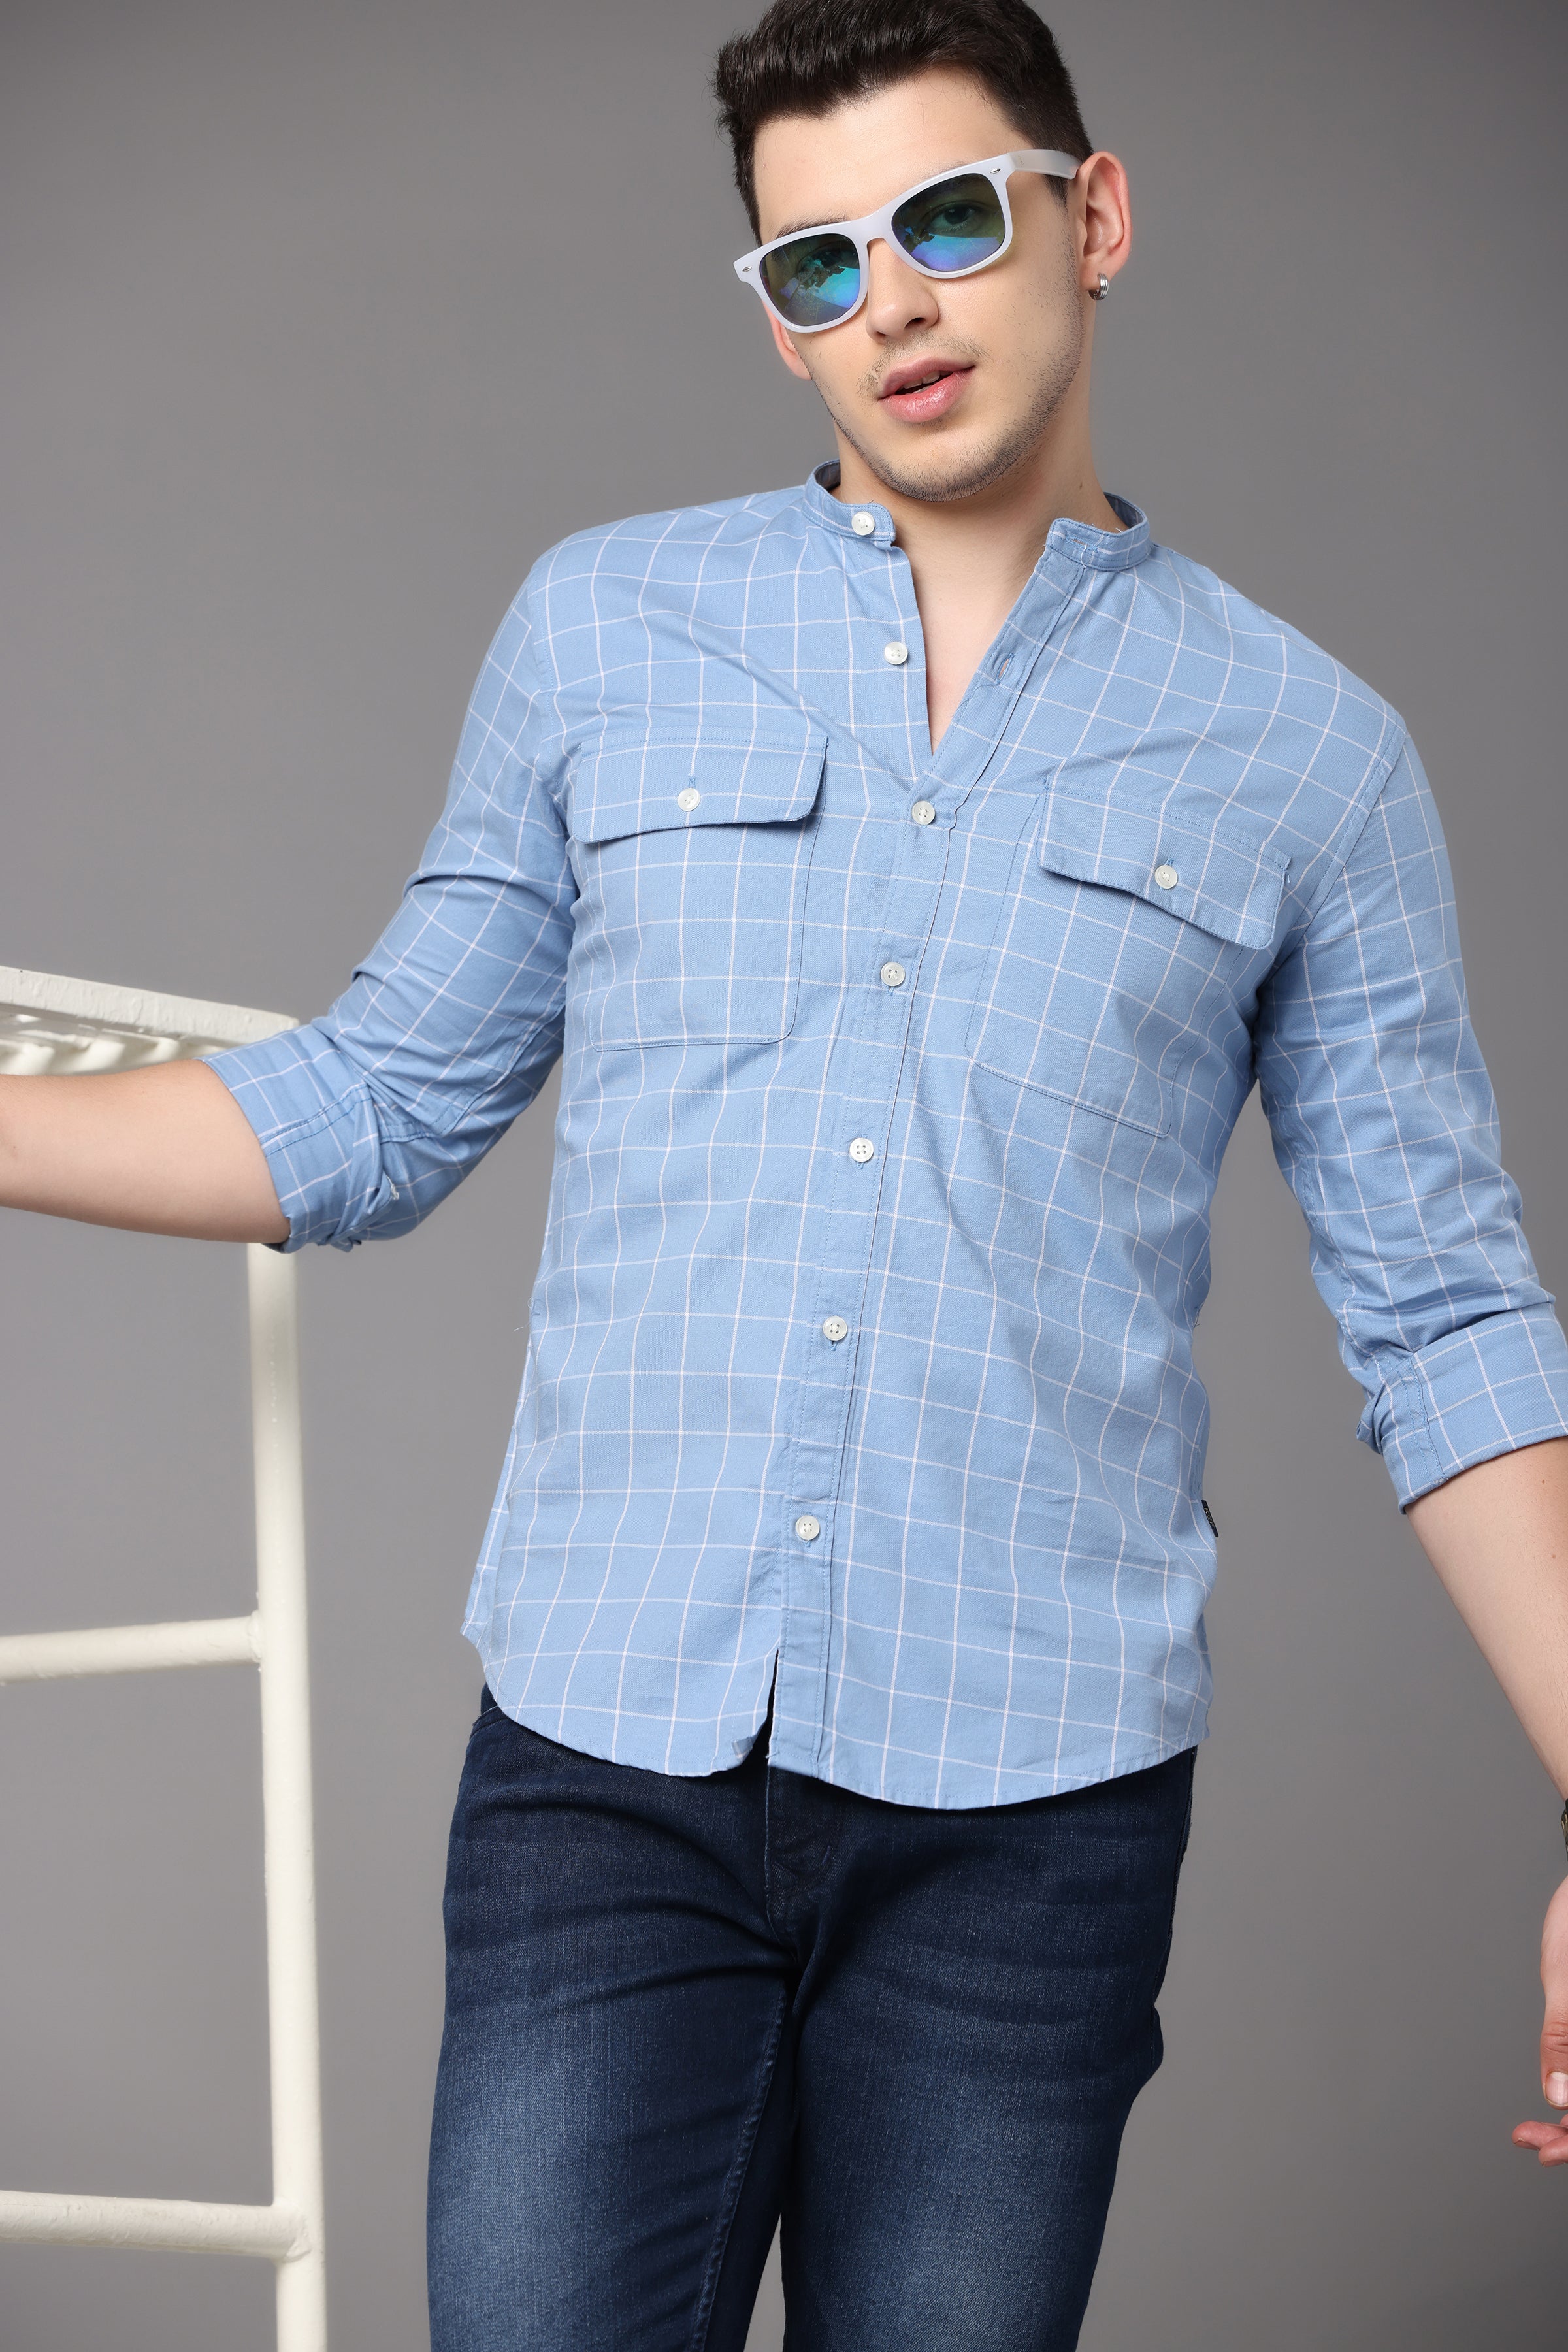 Beau Blue Check Shirt with Double Pocket Shirts Project 30 